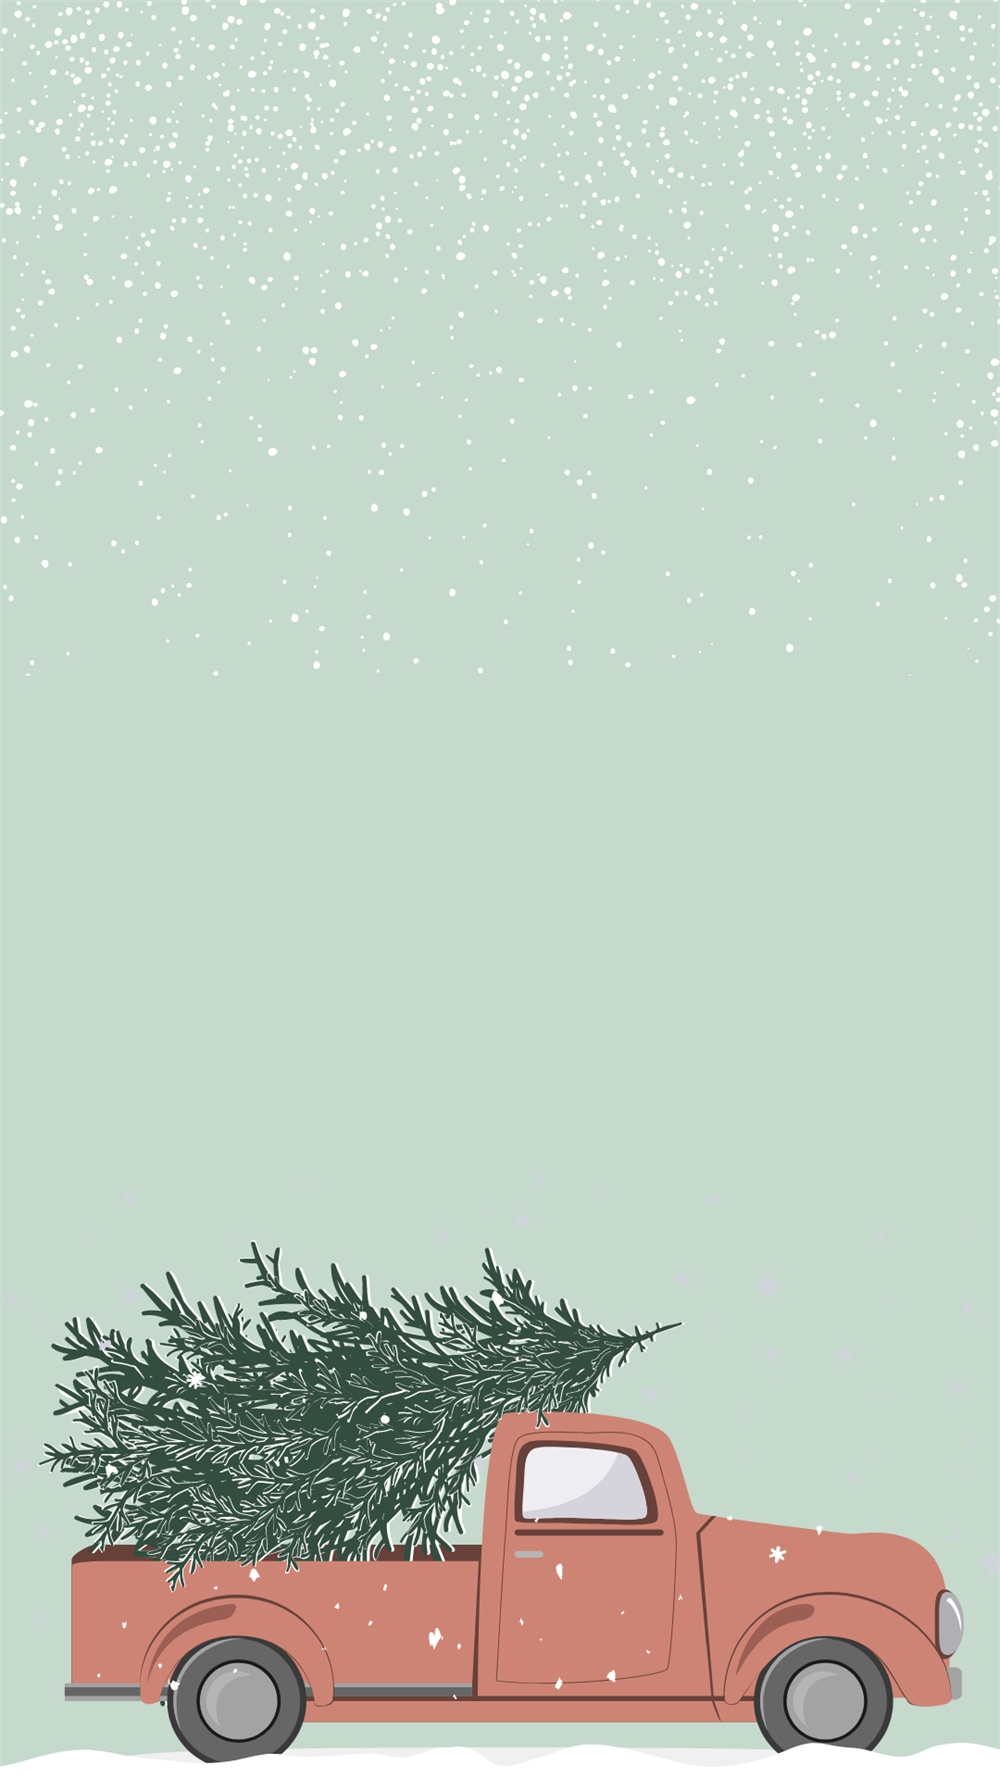 Simple Christmas Wallpaper with Truck